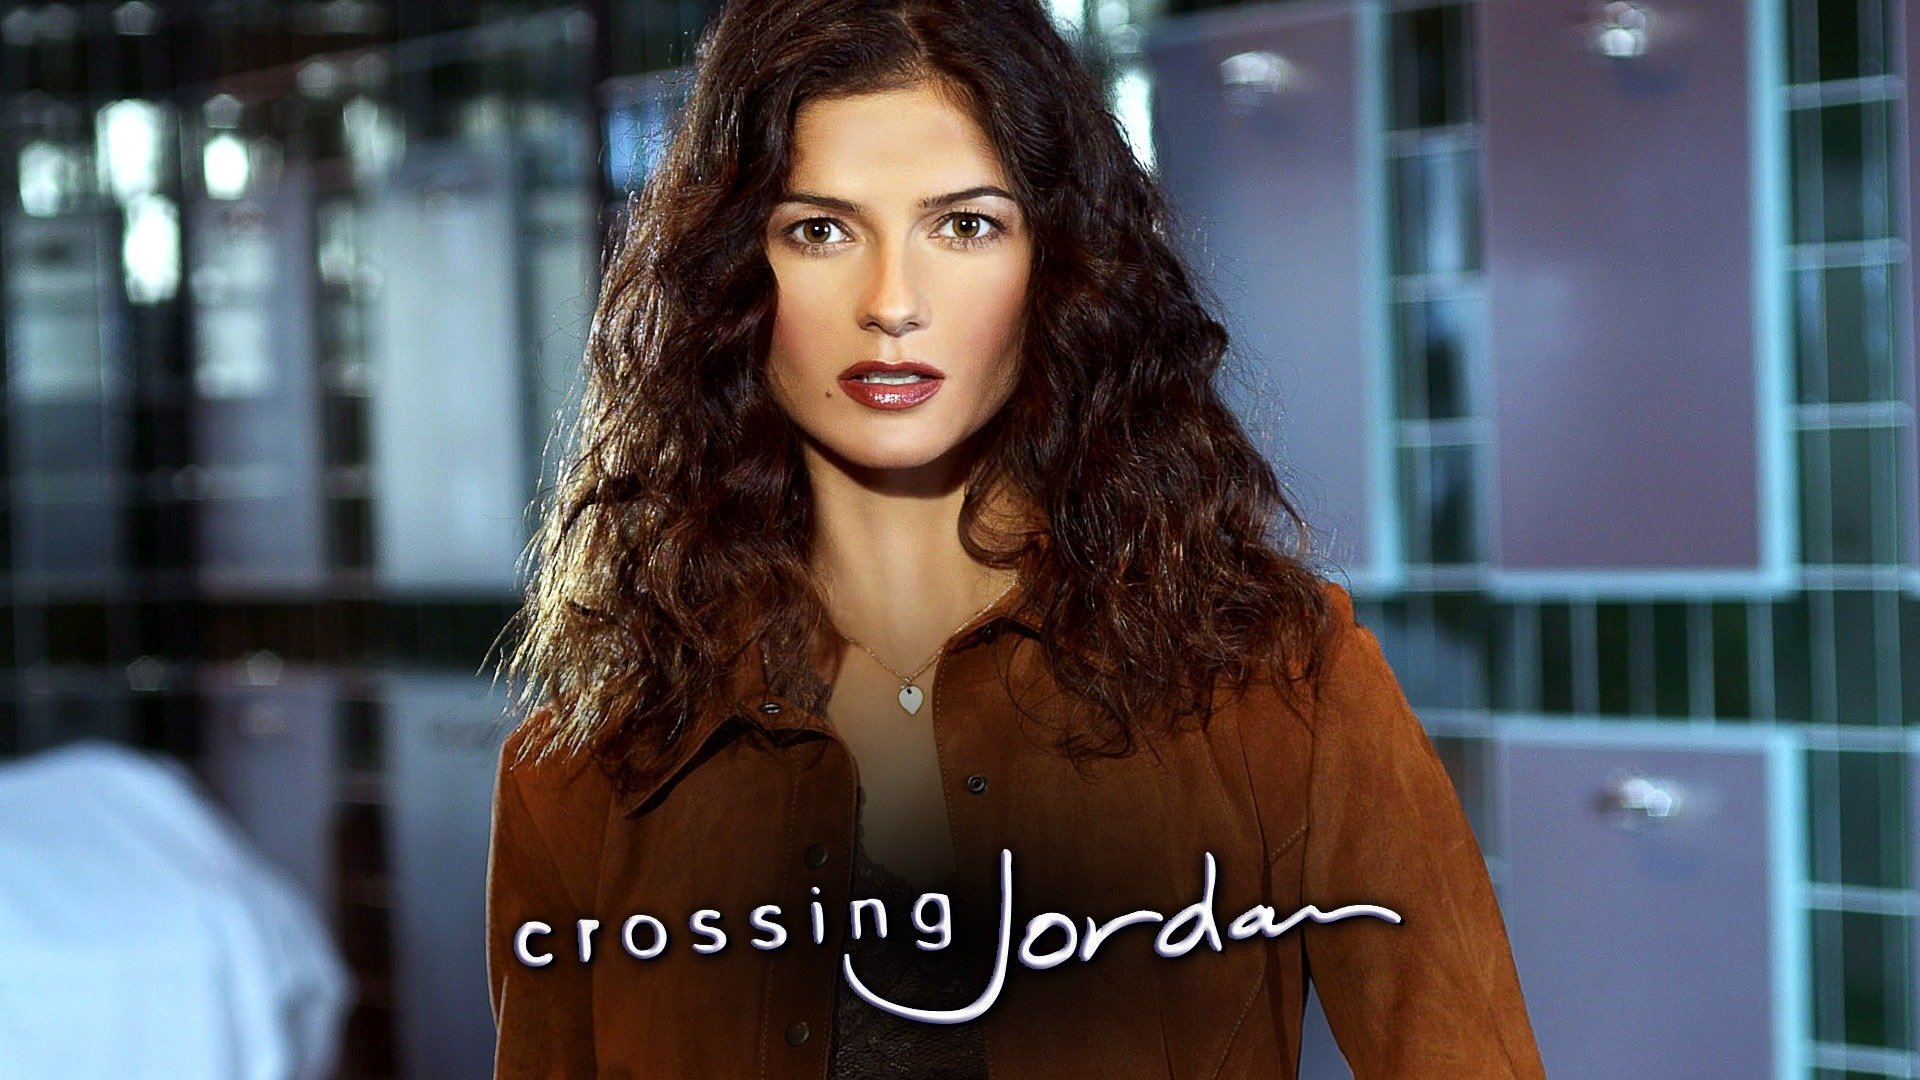 is crossing jordan on any streaming service